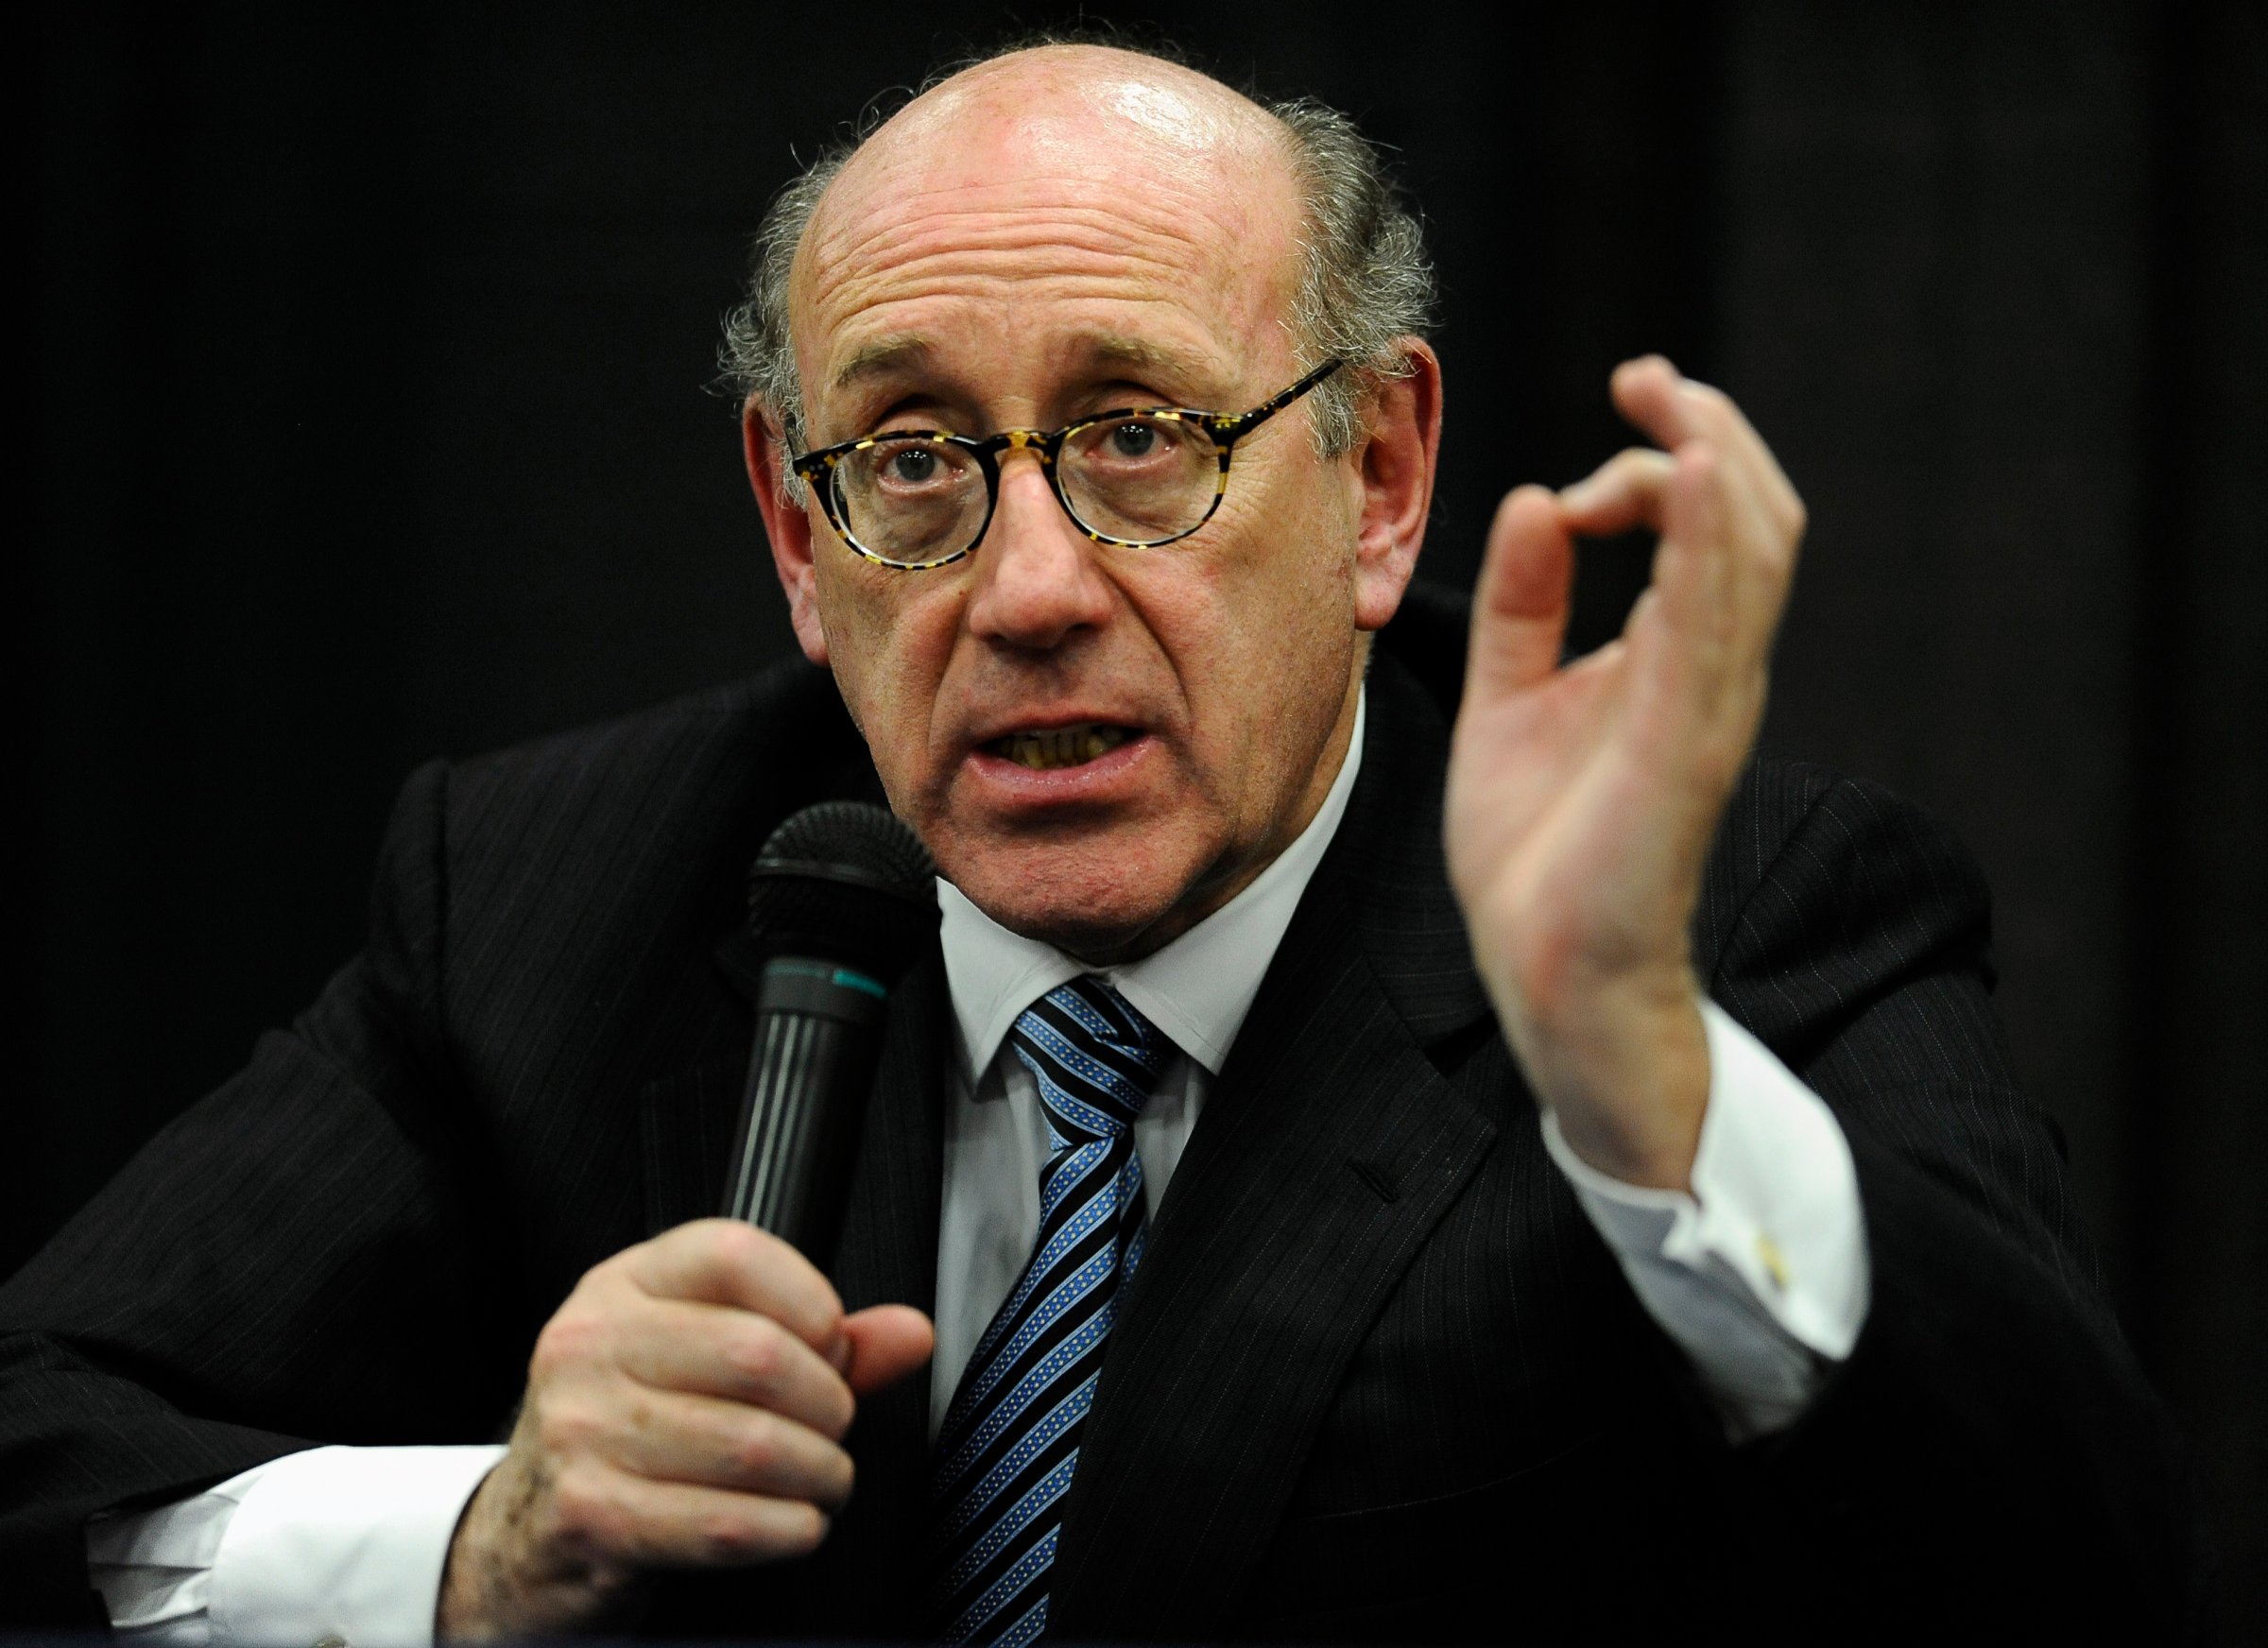 Attorney and special adviser Kenneth Feinberg speaks at a public forum on the distribution of Newtown donations at Edmond Town Hall in Newtown, Conn. on July 11, 2013.